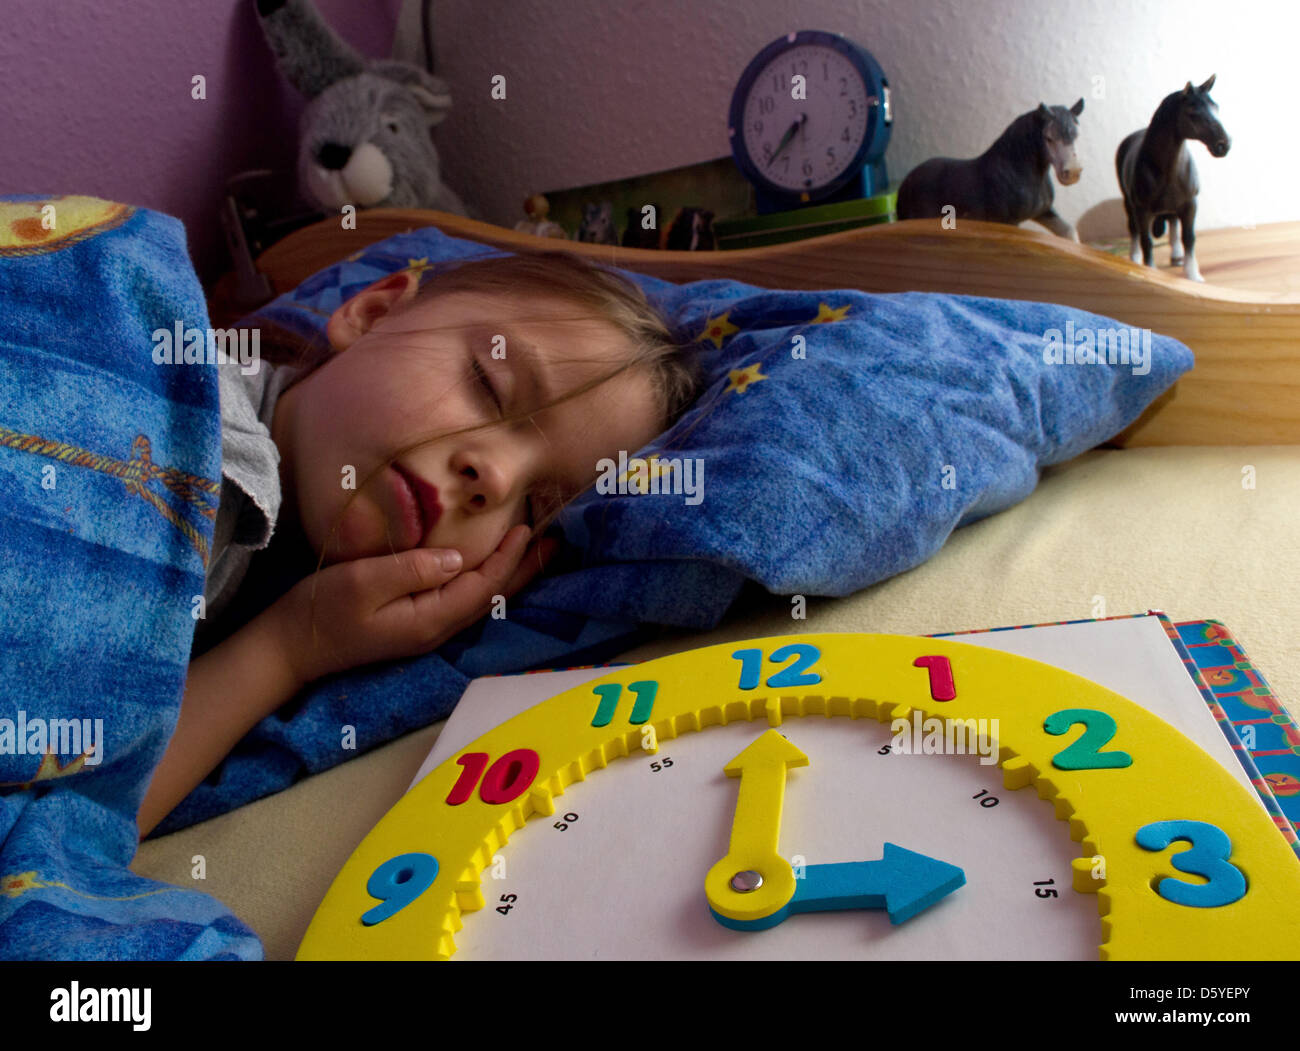 ILLUSTRATION - Amy (6) sleeps next to her children's clock in Sieversdorf, Germany, 19 october 2012. In the night from 27 to 28 October, the clocks are adjusted backward marking the start of winter time in Europe. Photo: Patrick Pleul Stock Photo